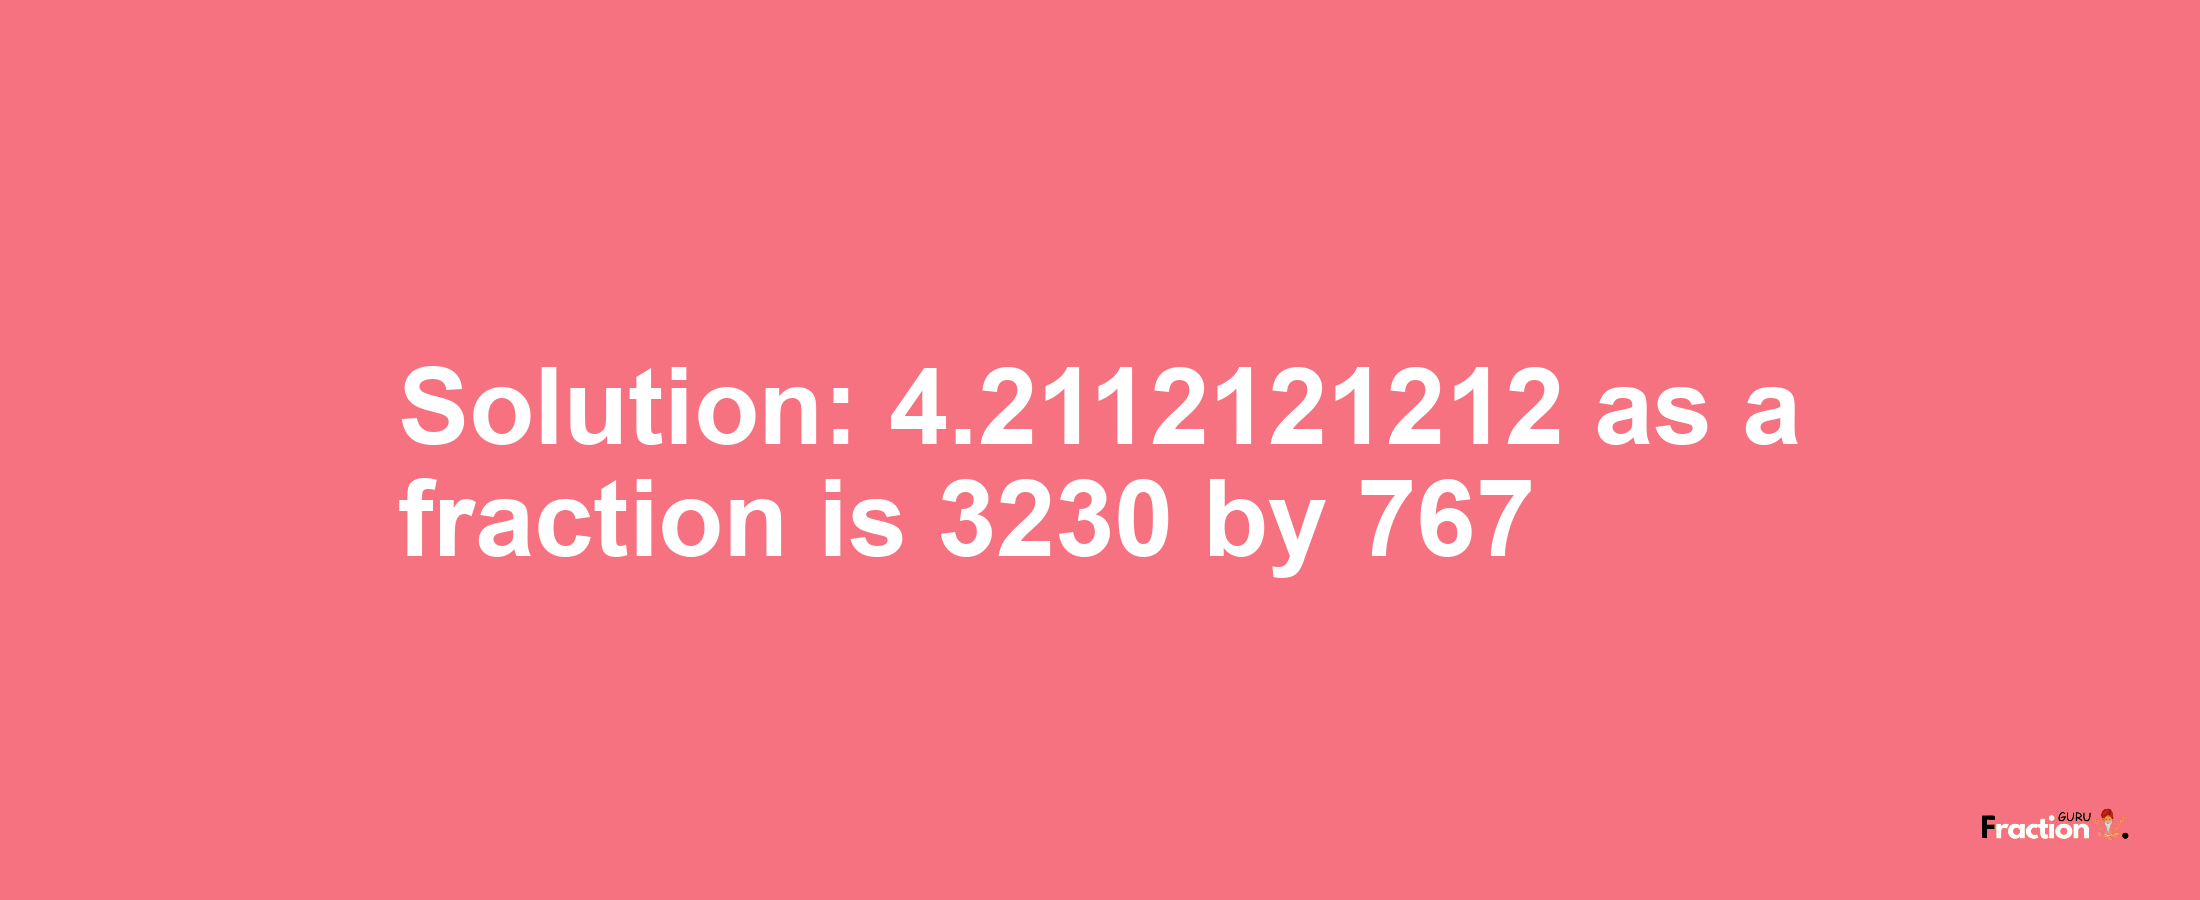 Solution:4.2112121212 as a fraction is 3230/767